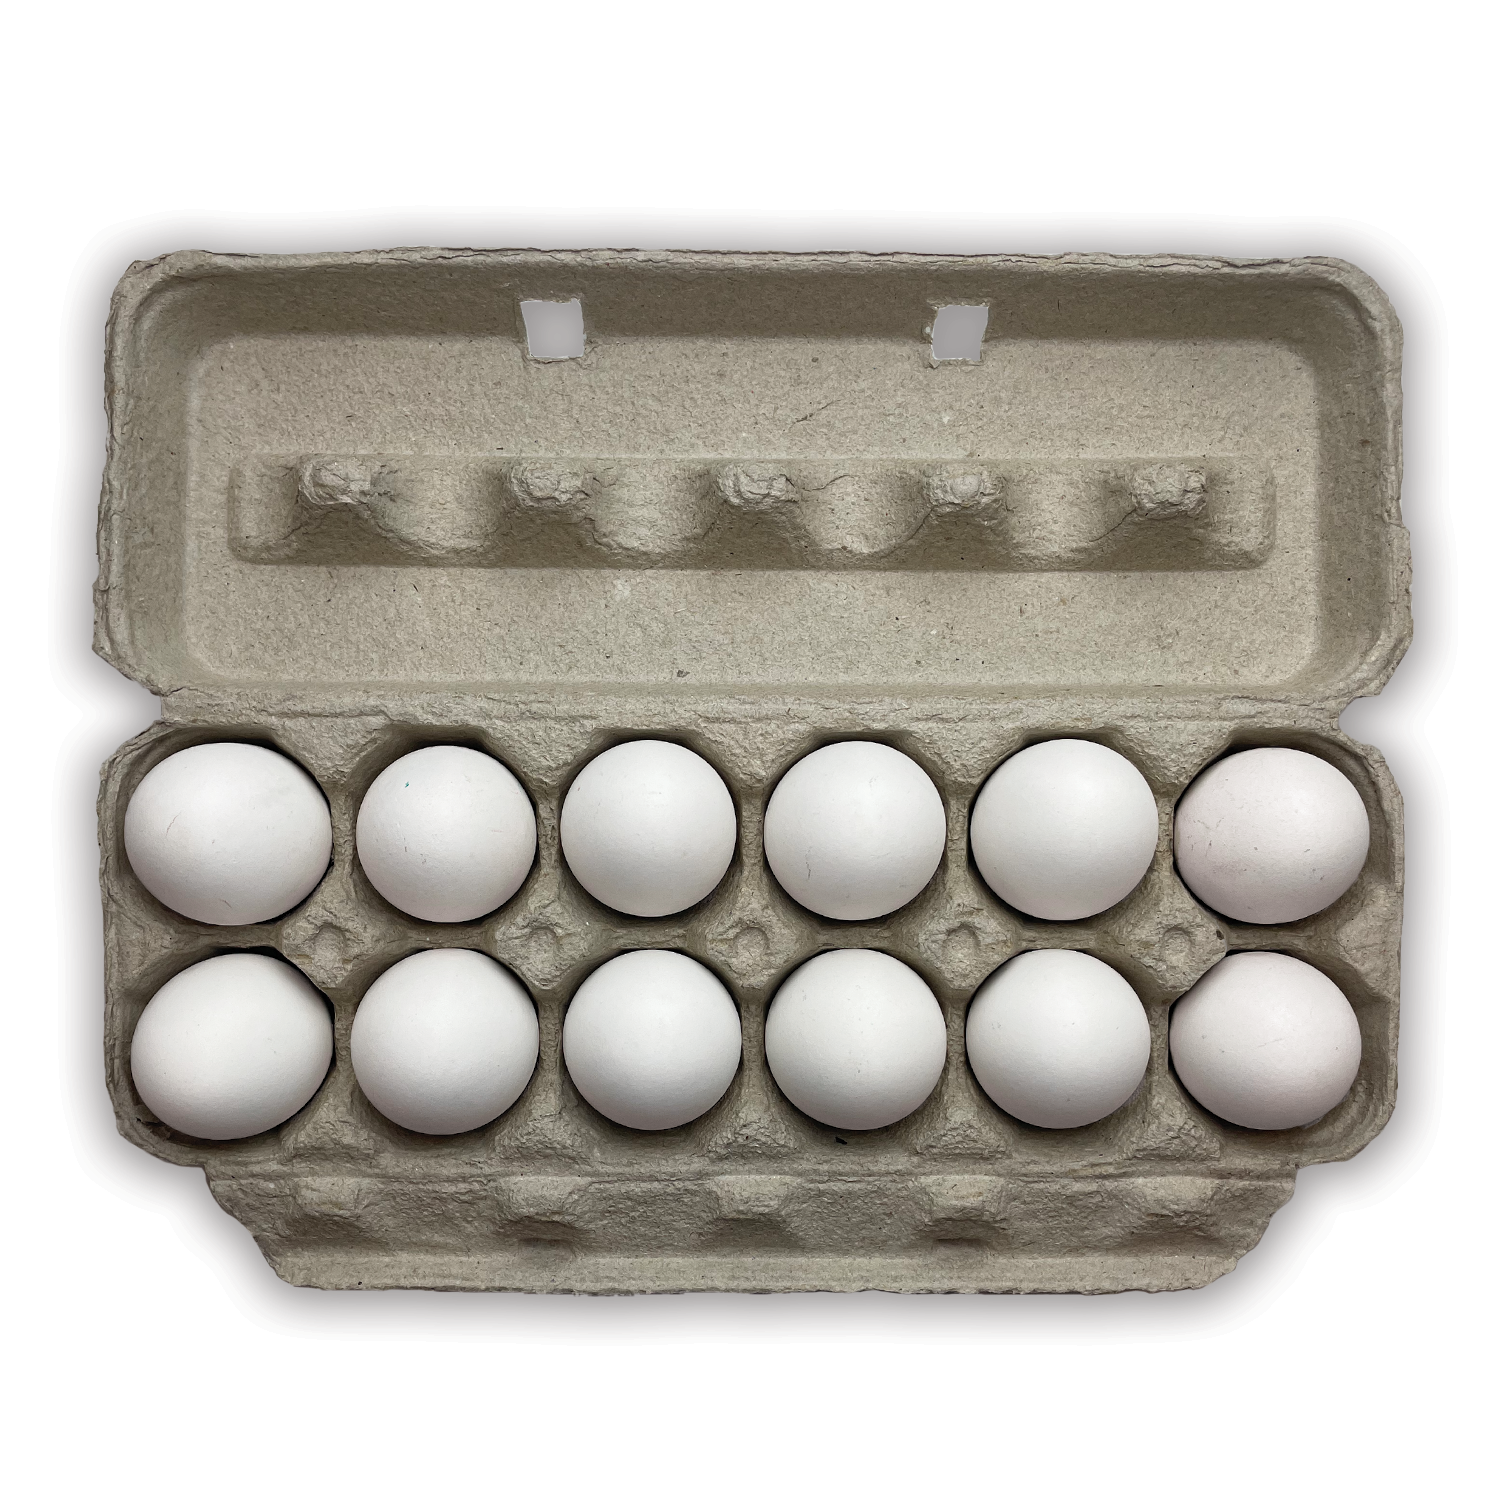 Chelbie Blank Natural Pulp Paper Egg Cartons Holds 12 Eggs (Set of 15) Prep & Savour